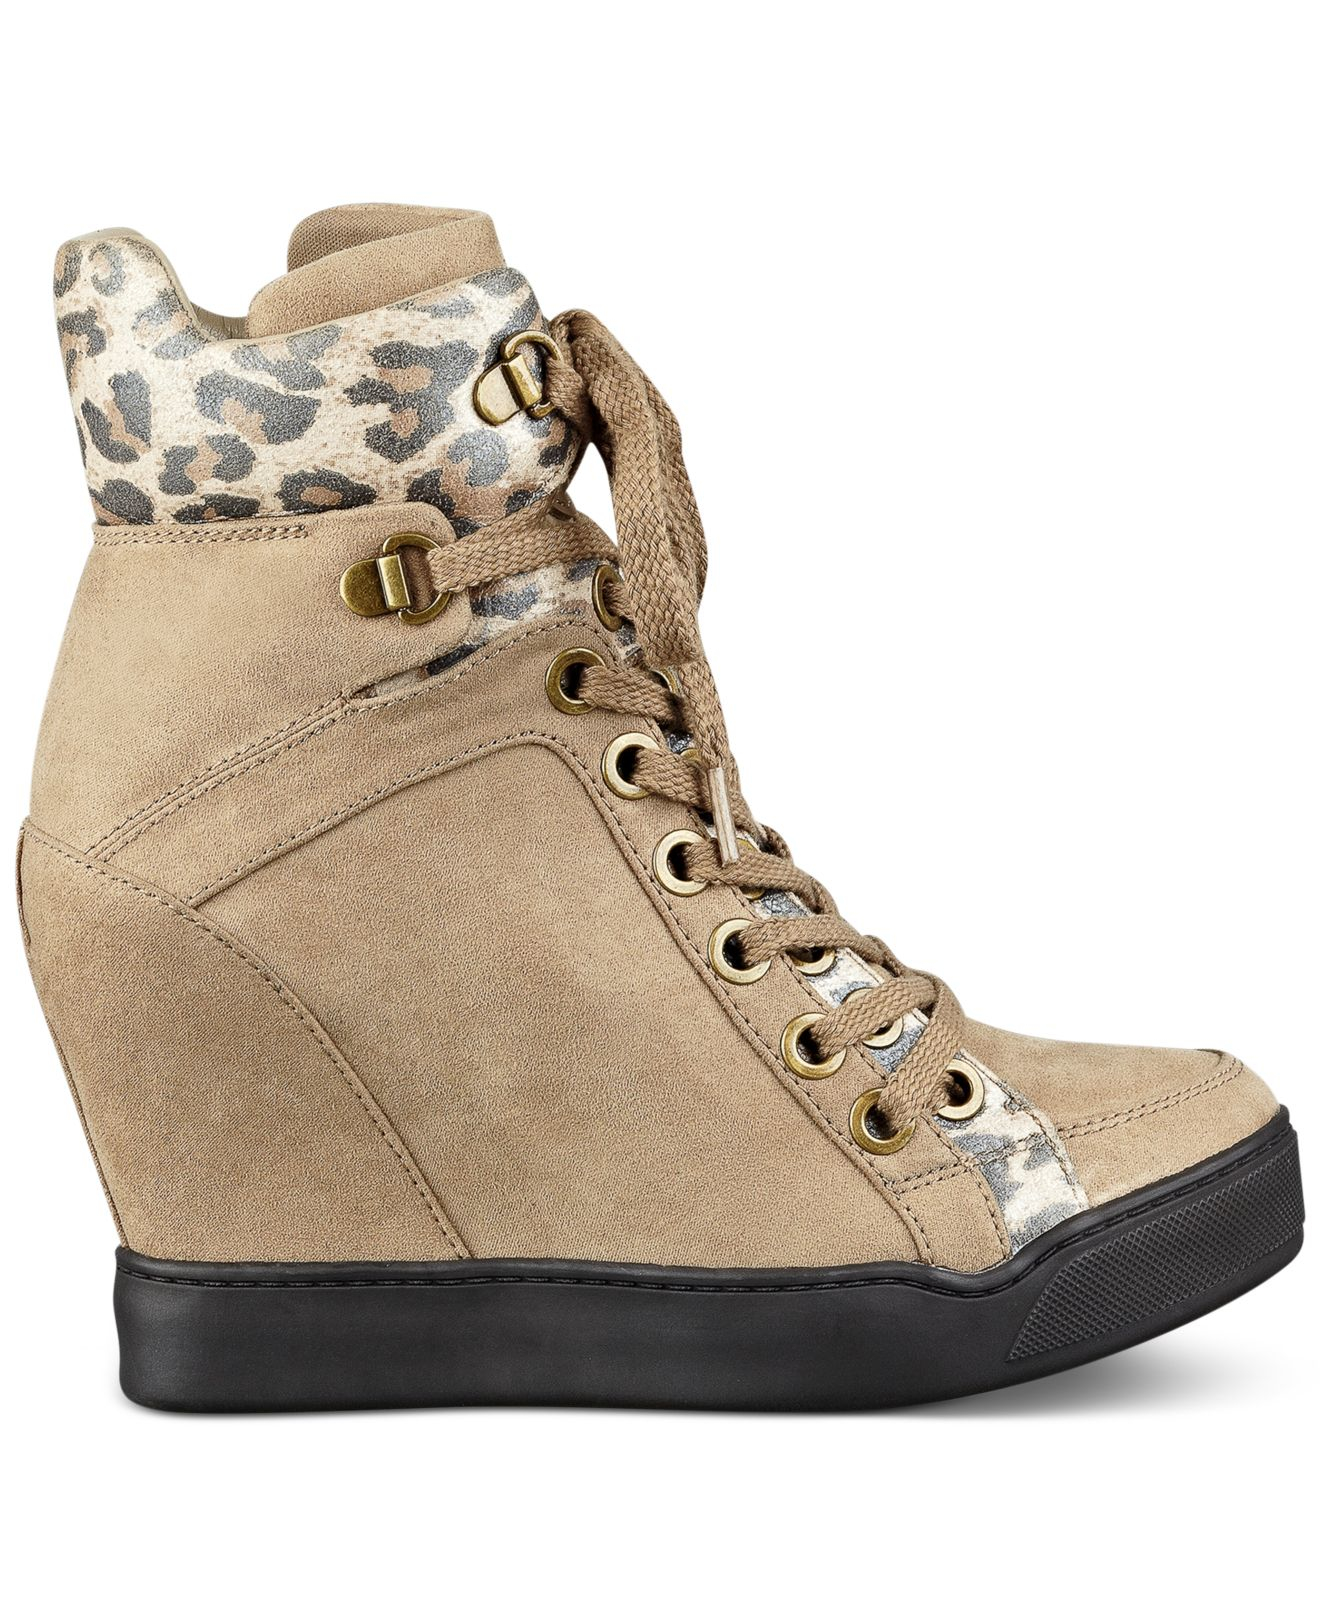 Guess Women's Matty Wedge Sneakers in Light Natural (Natural) - Lyst